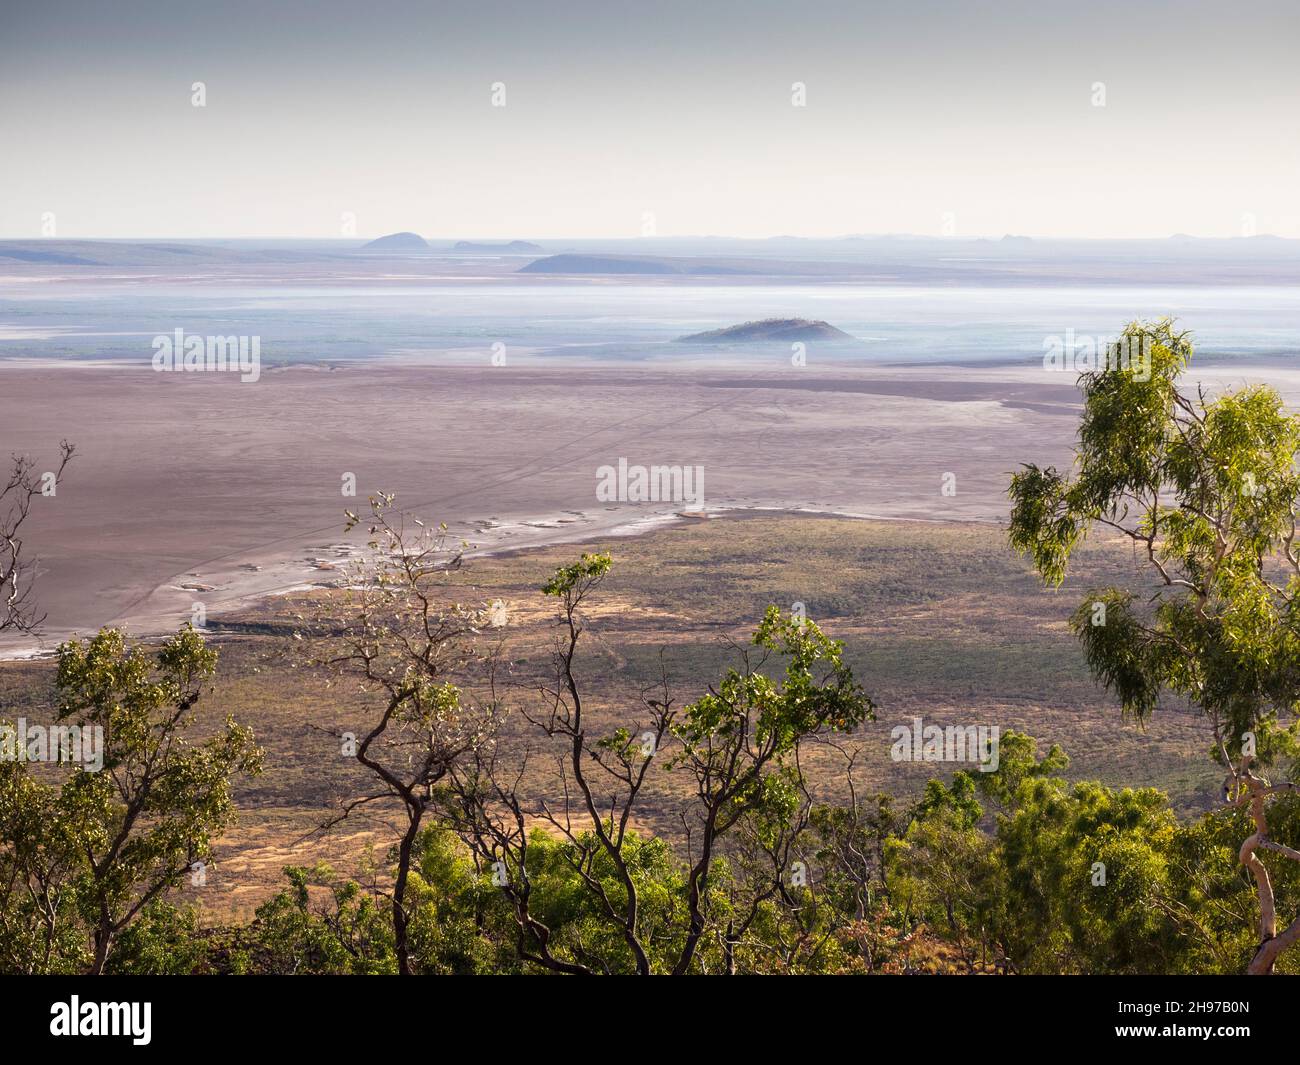 Looking north across Cambridge Gulf mudflats from  Five Rivers Lookout on Mount Bastion (325m), Wyndham, East Kimberley Stock Photo